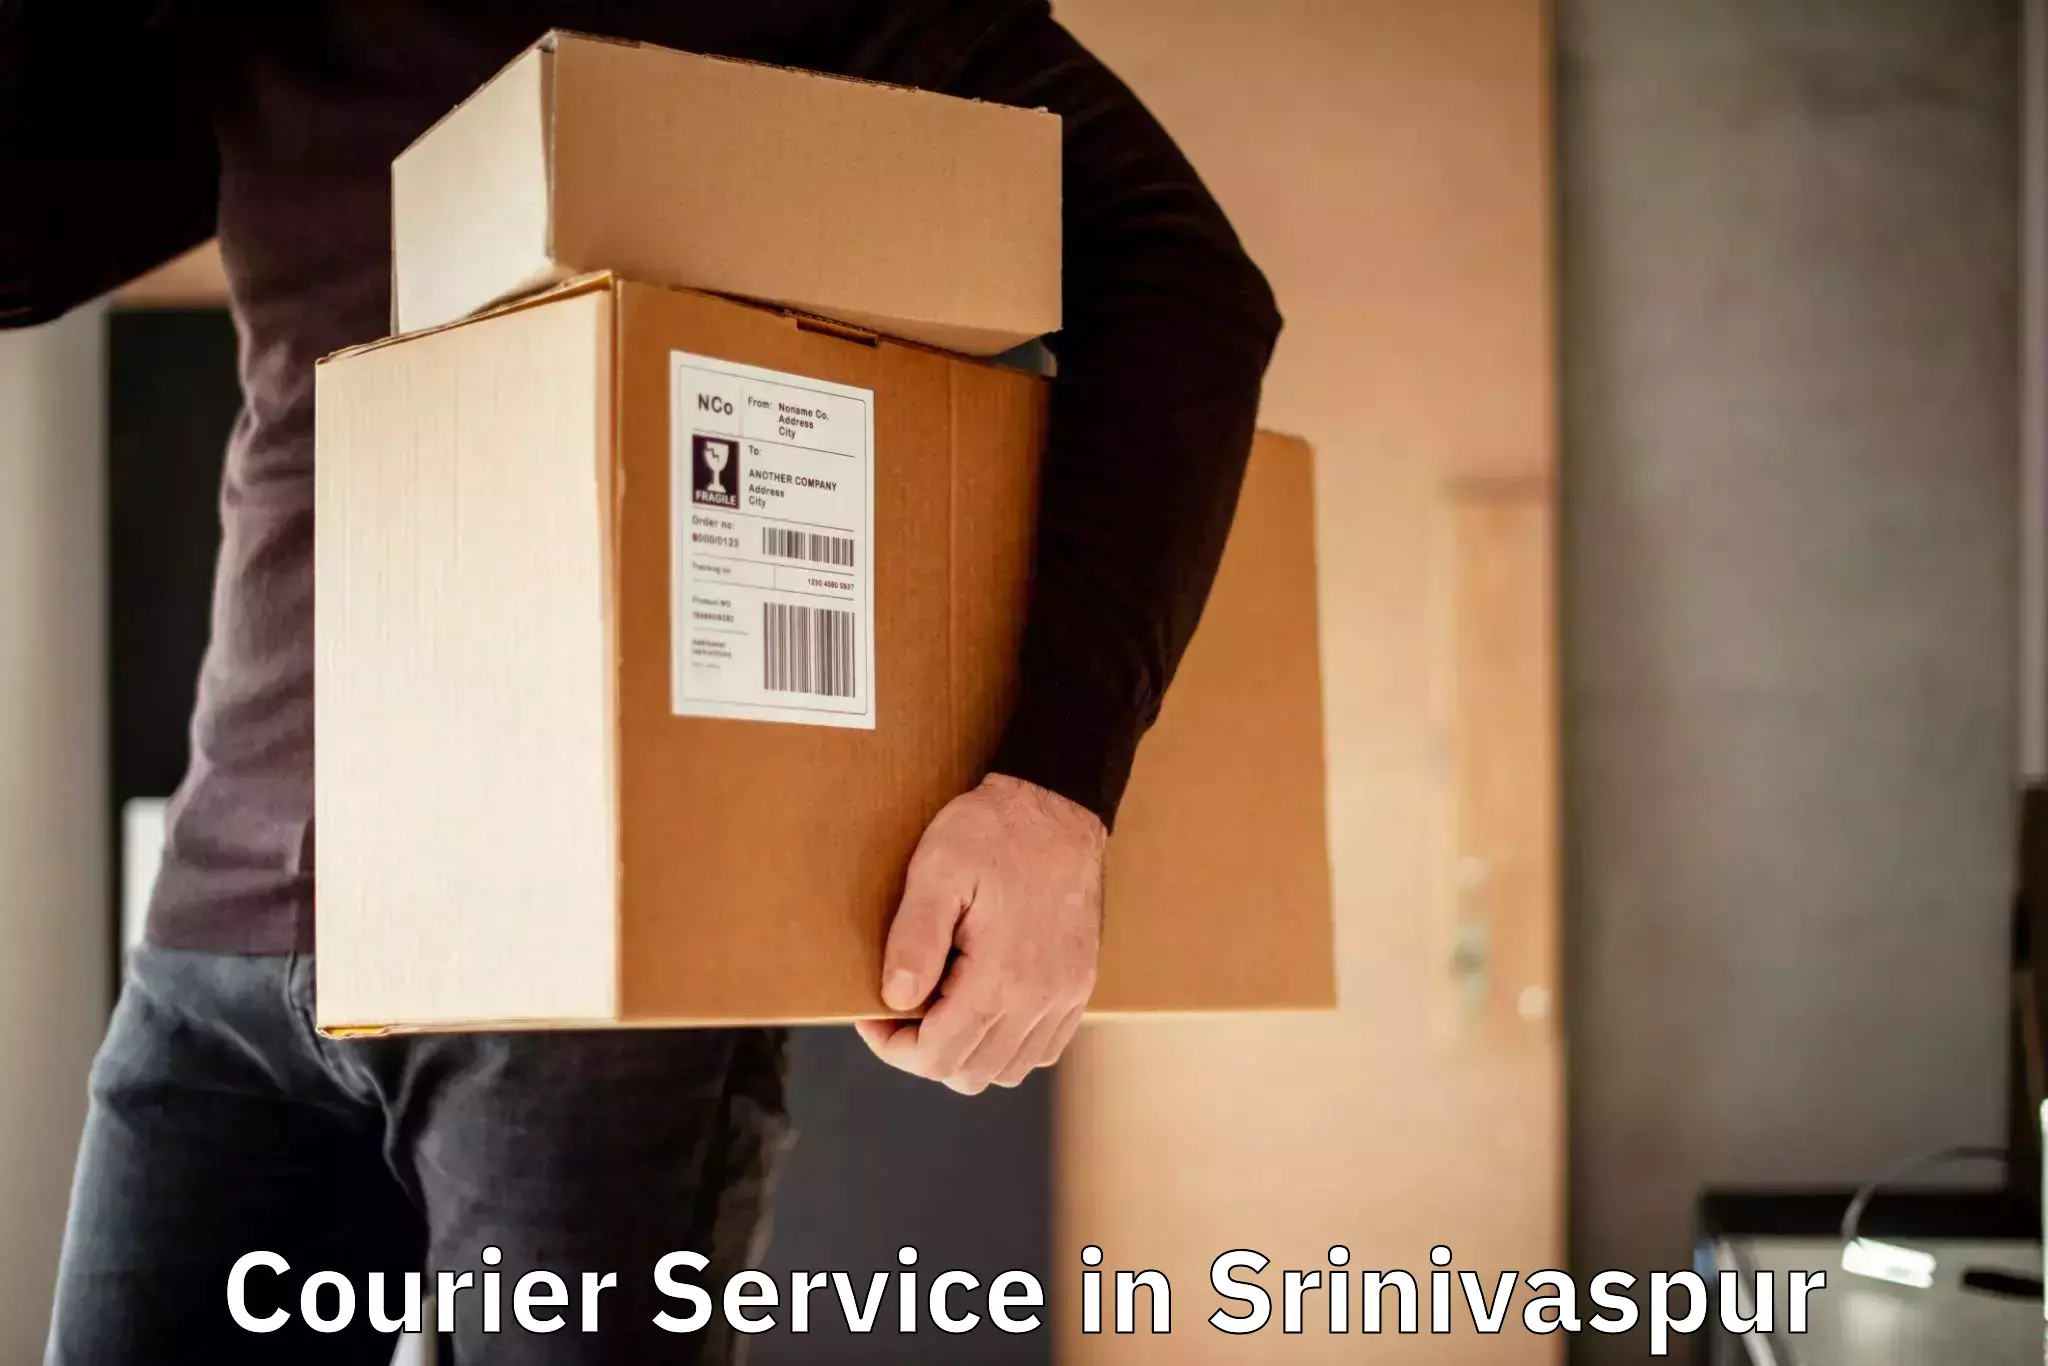 End-to-end delivery in Srinivaspur